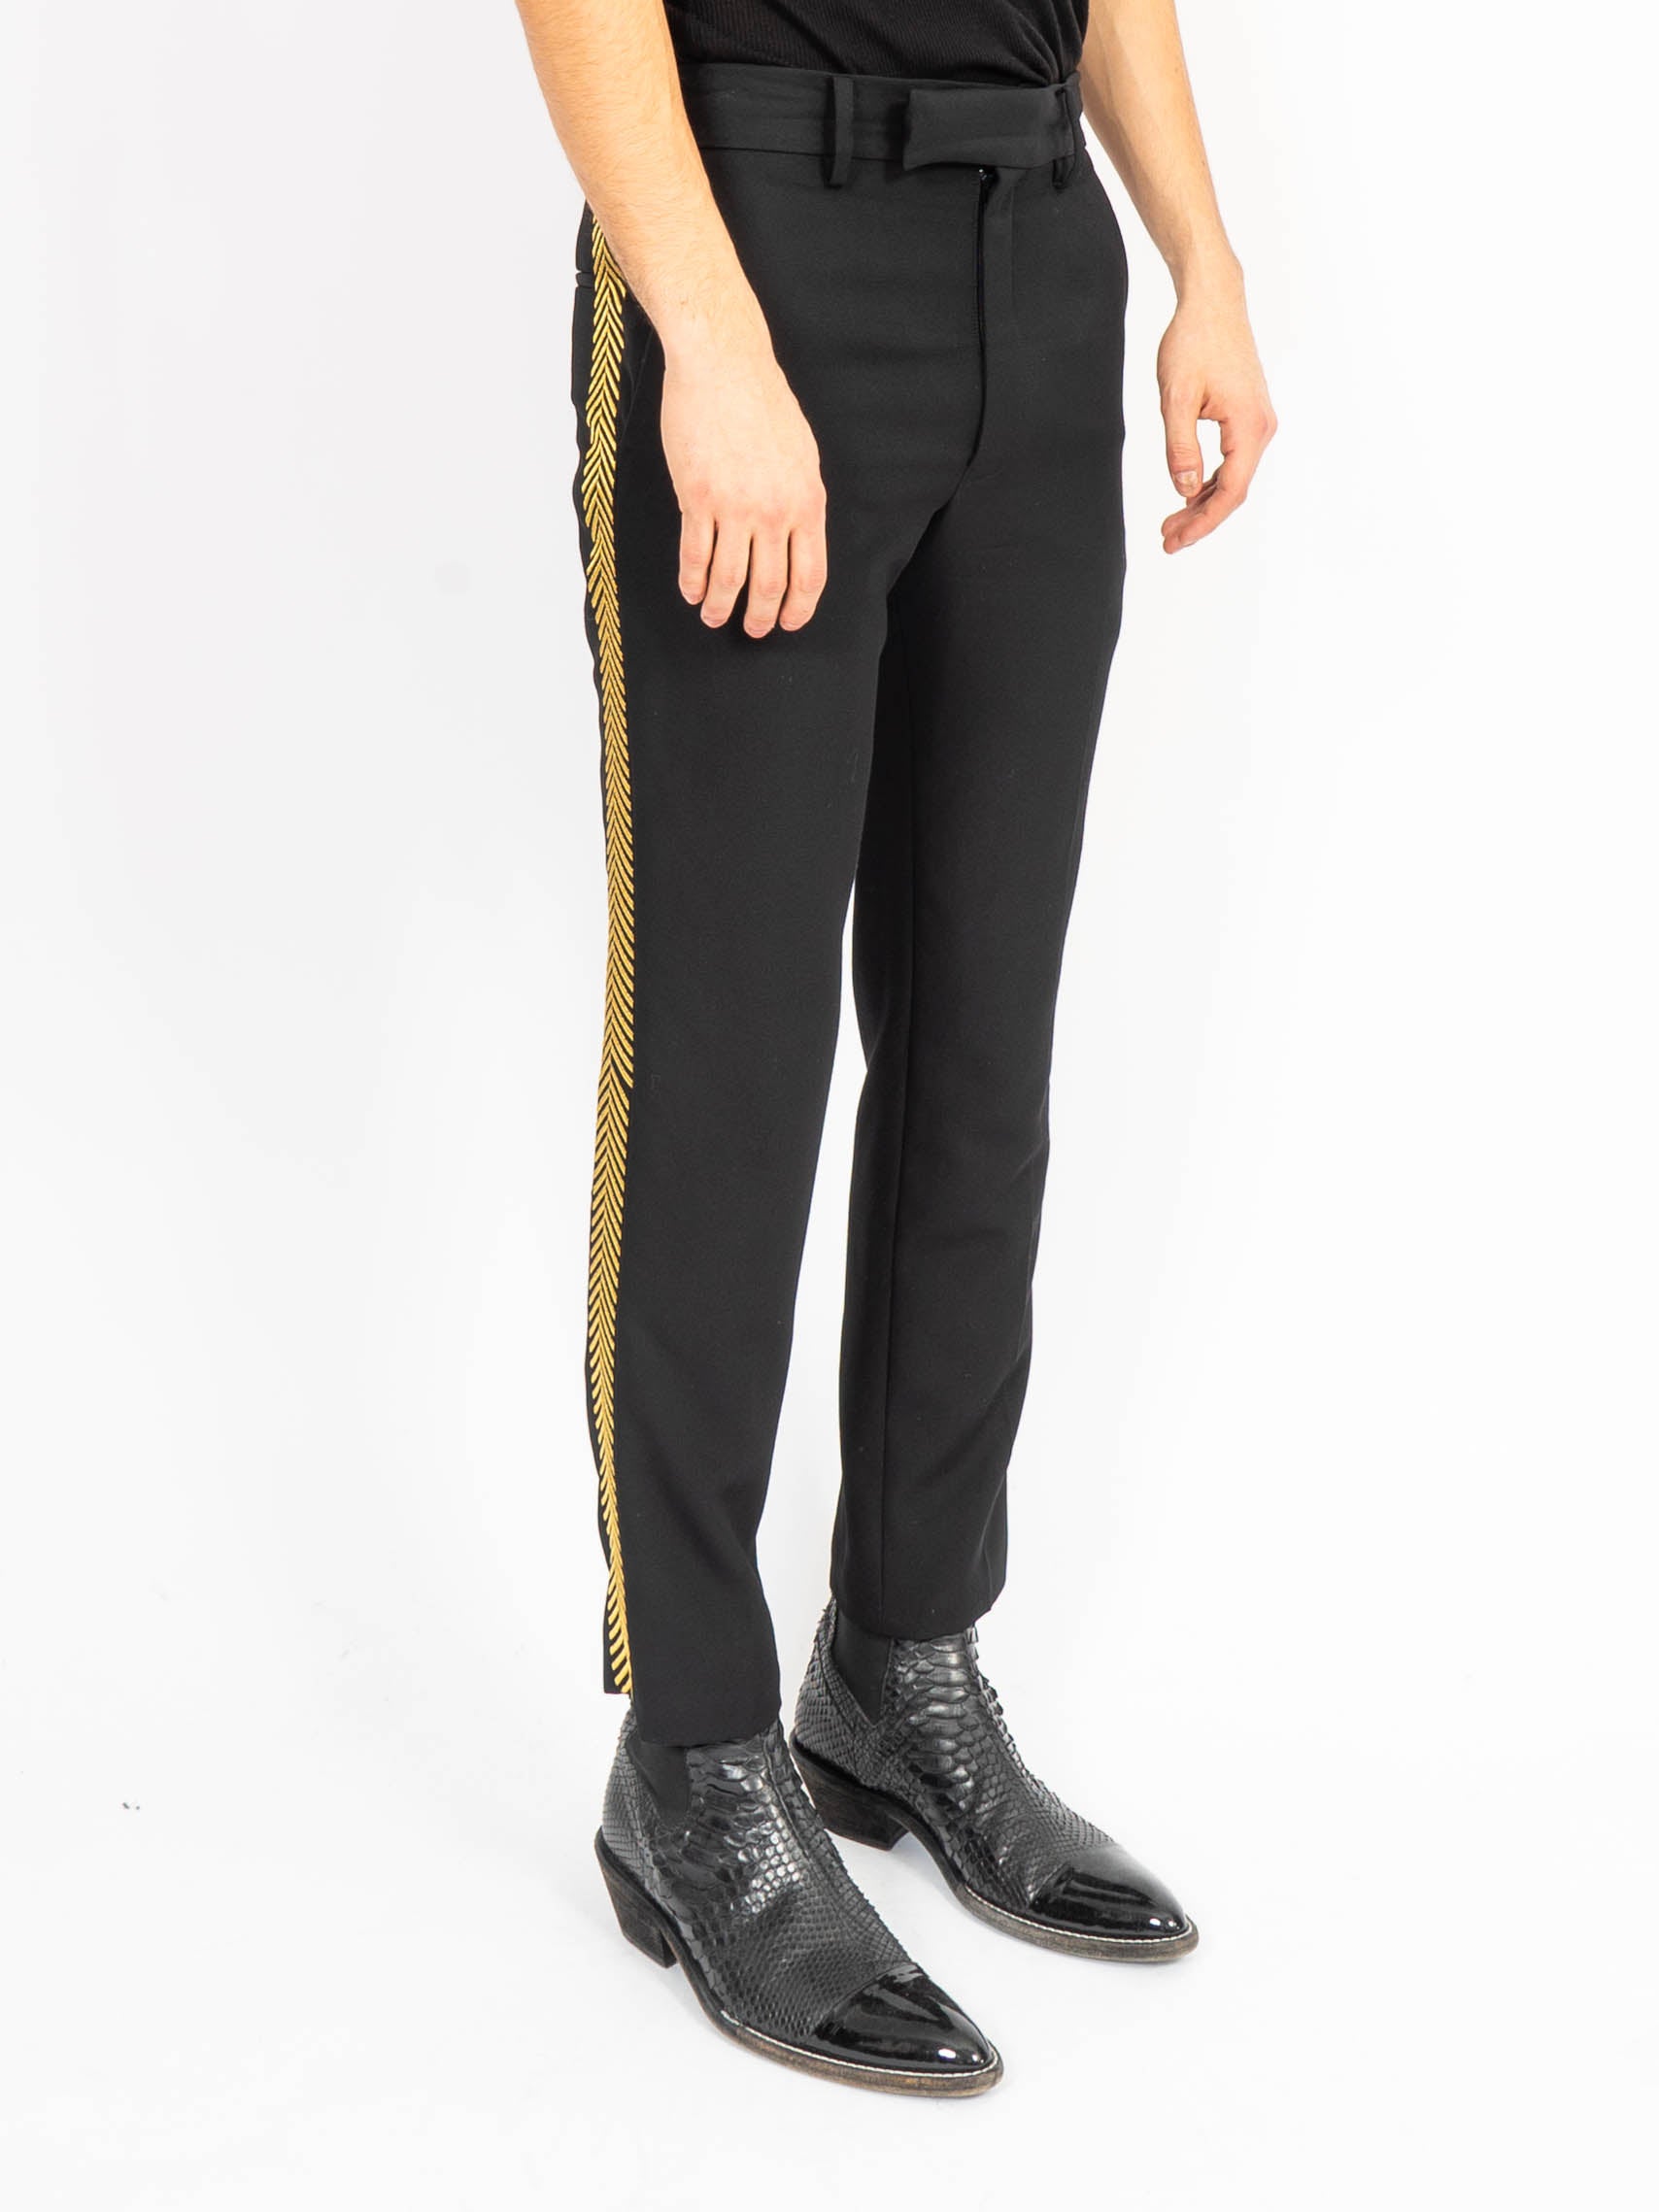 FW19 Slim Black Wool Trousers Gold Side Embroidery